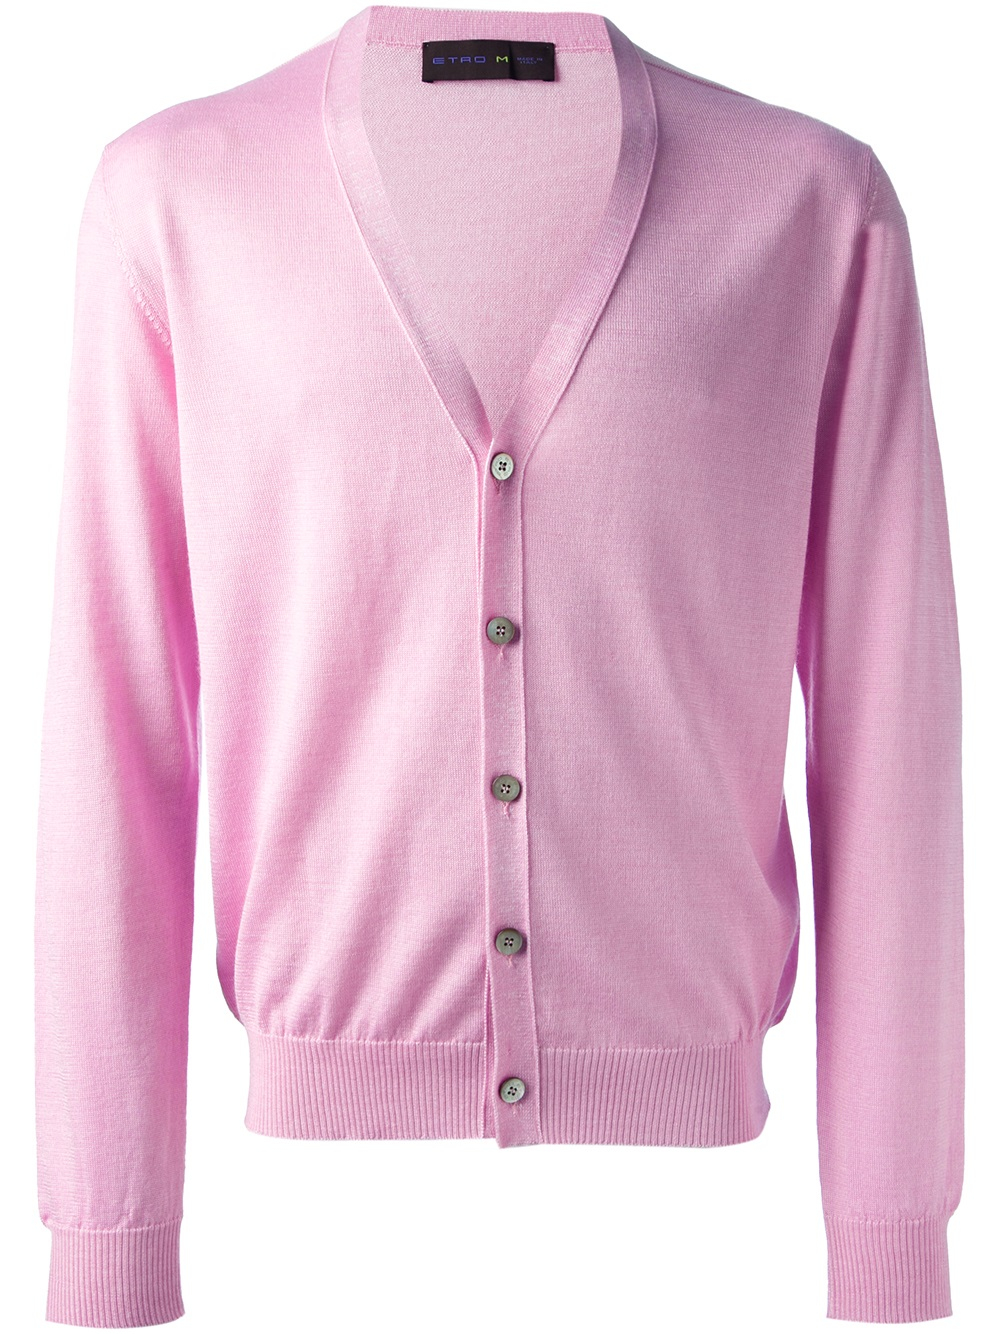 Etro Classic Cardigan in Pink & Purple (Pink) for Men - Lyst